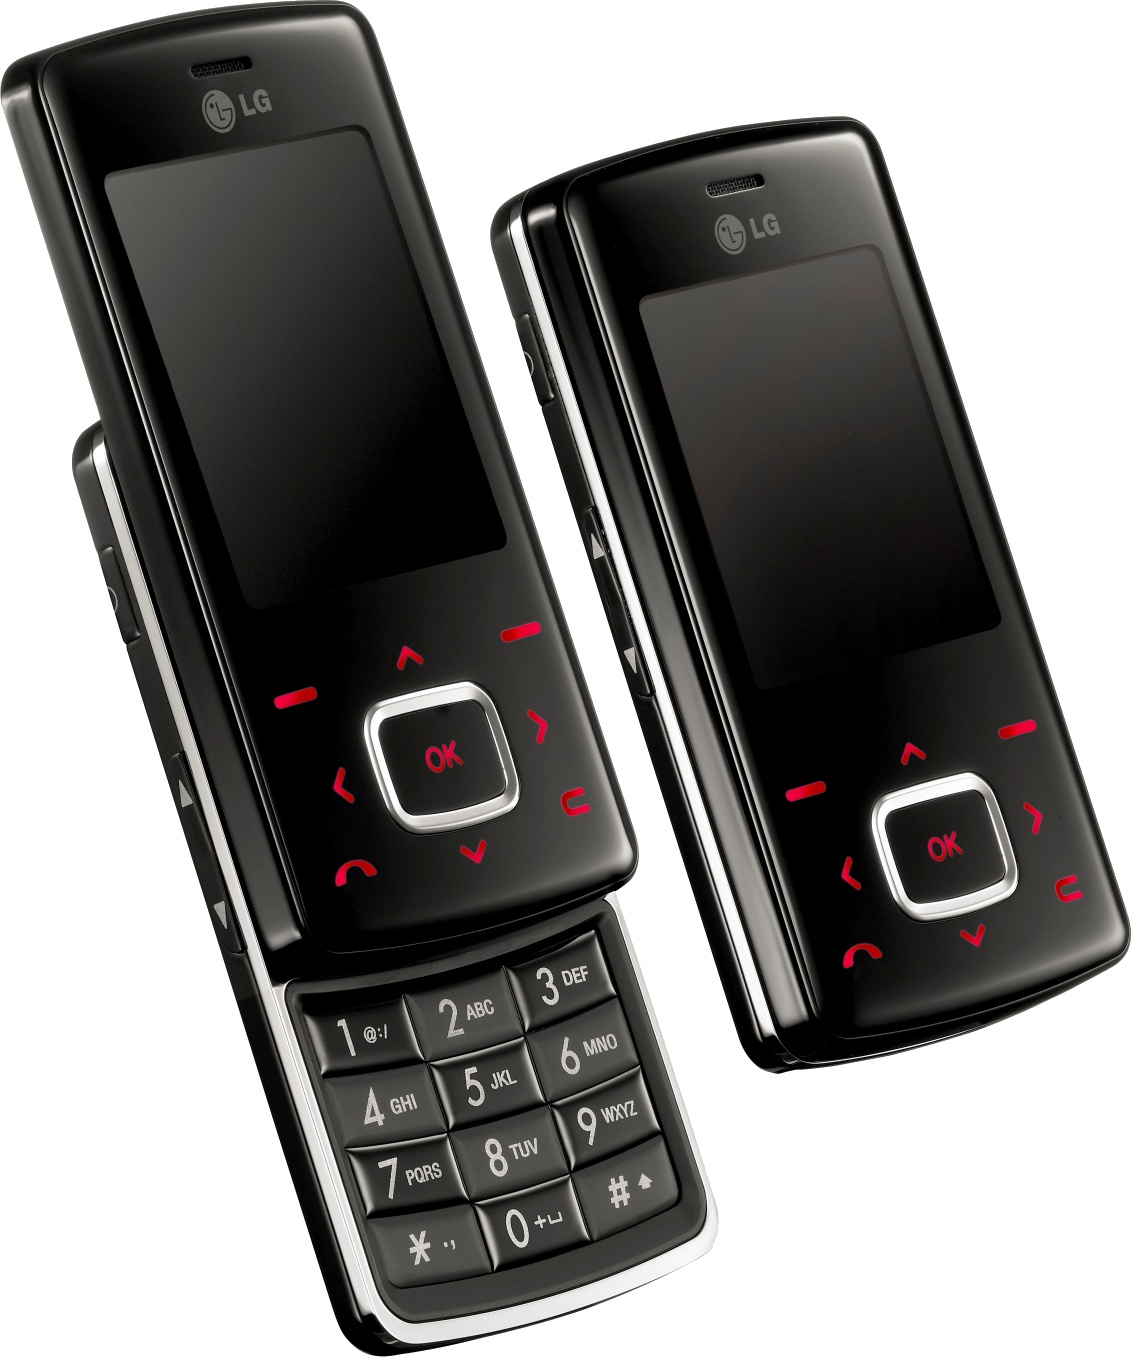 Retromobe - retro mobile phones and other gadgets: LG KG800 Chocolate (2006)